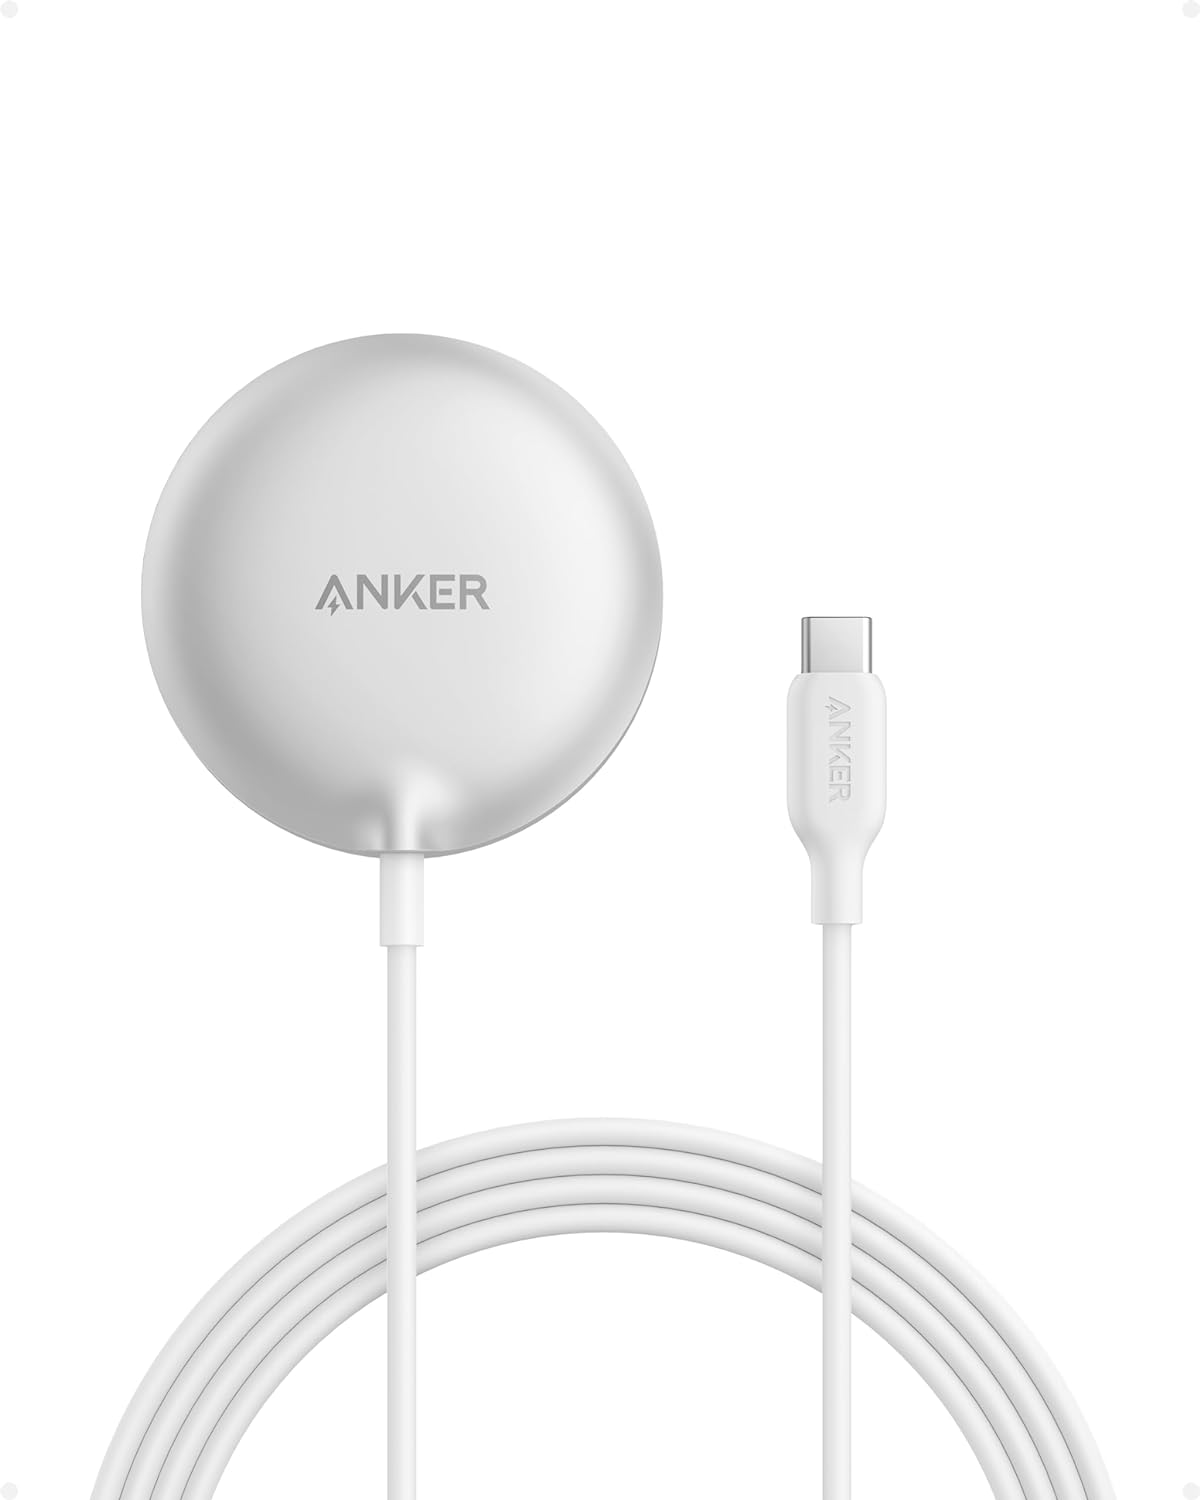 Anker MagGo Magnetic Wireless Charger (Pad), Qi2 Certified 15W Ultra-Fast MagSafe Compatible Wireless Charger